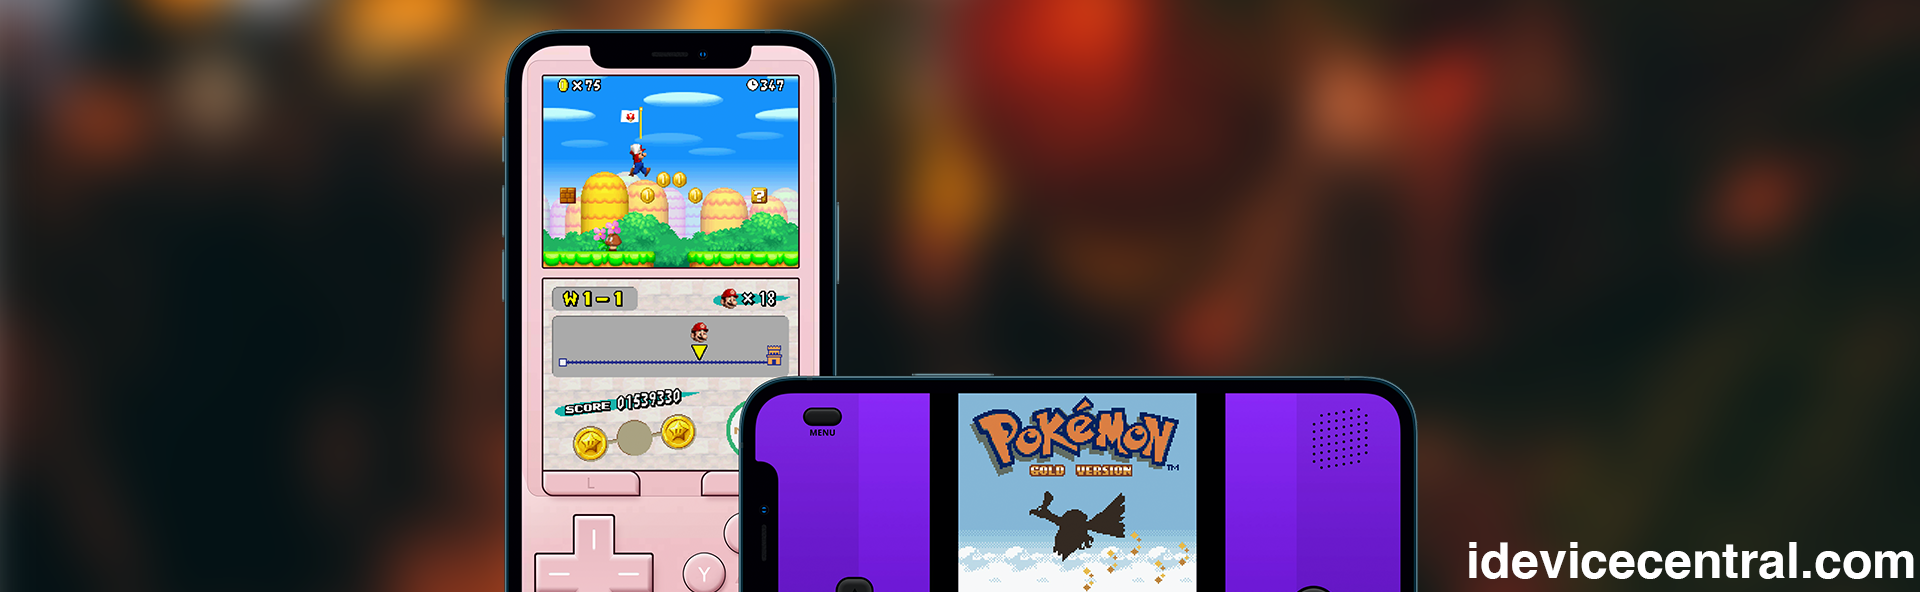 Delta Emulator for iOS is Now Available In The official App Store